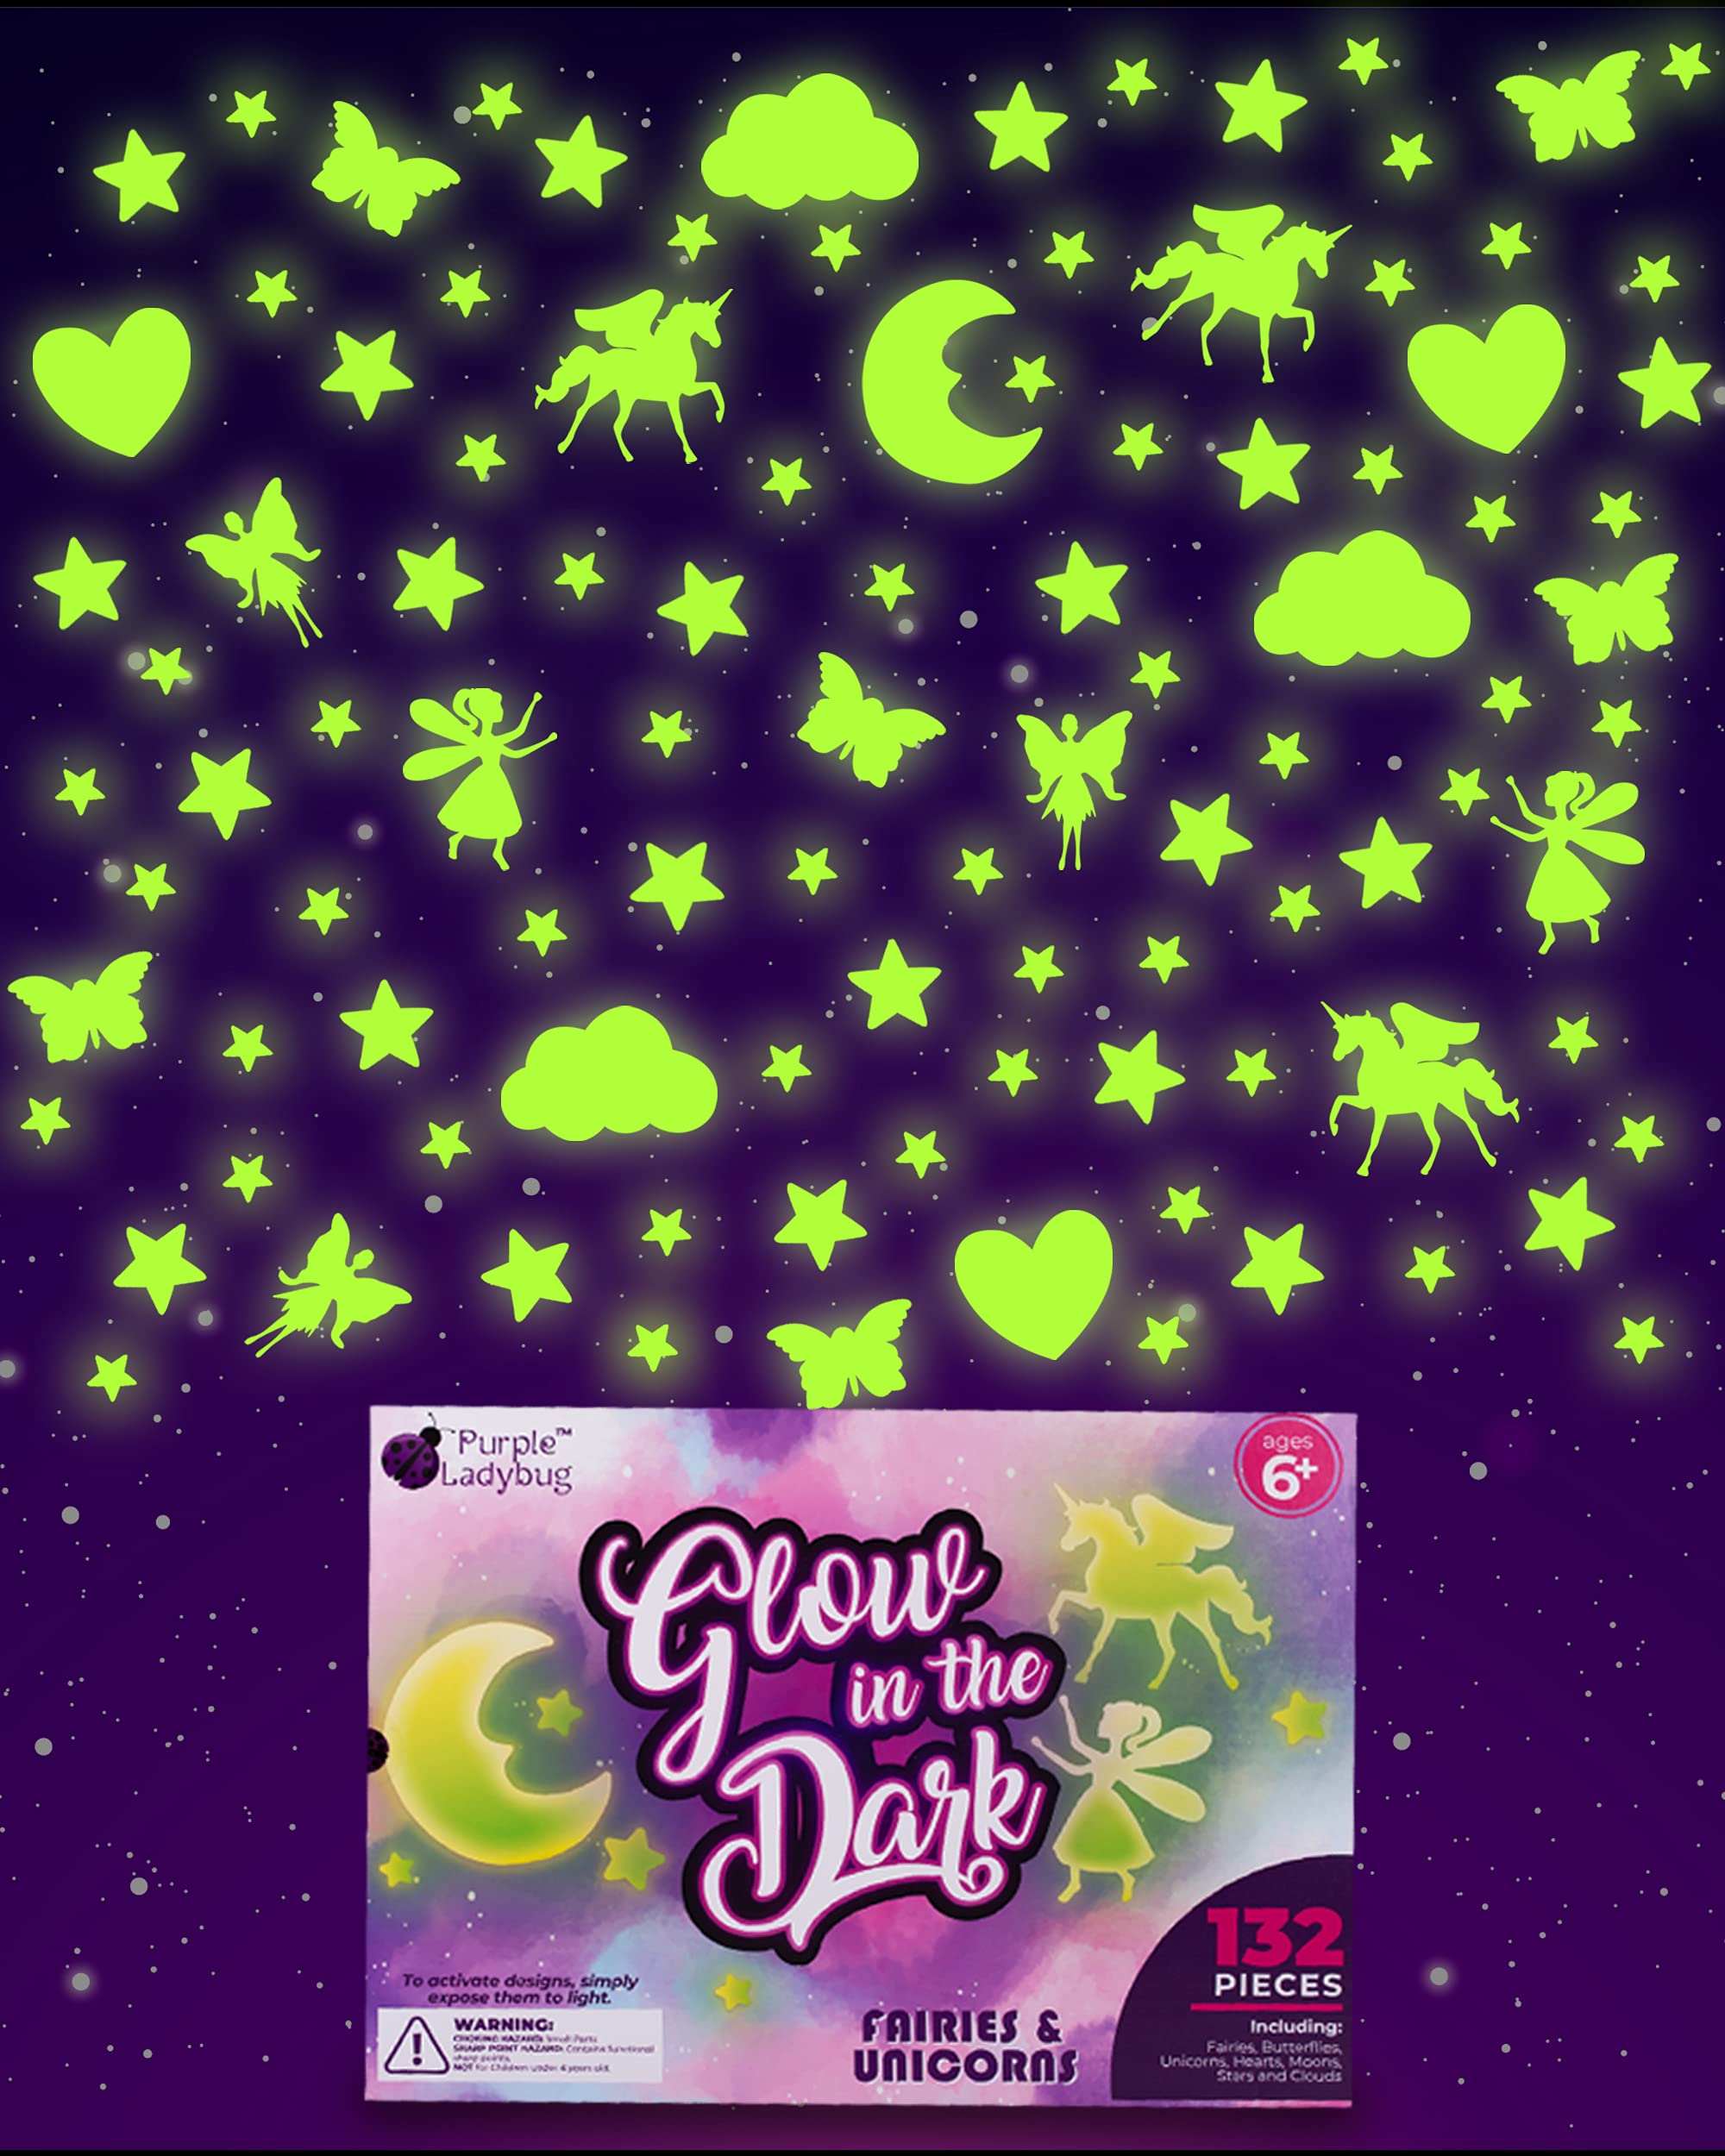 Purple Ladybug 132 Pieces of Glow in The Dark Stars, Unicorns, Fairies, Butterflies, & More - Great Accessories for Girls Bedroom, No Mess Ceiling & Wall Décor for Kids Room, Cool Birthday Girl Gifts